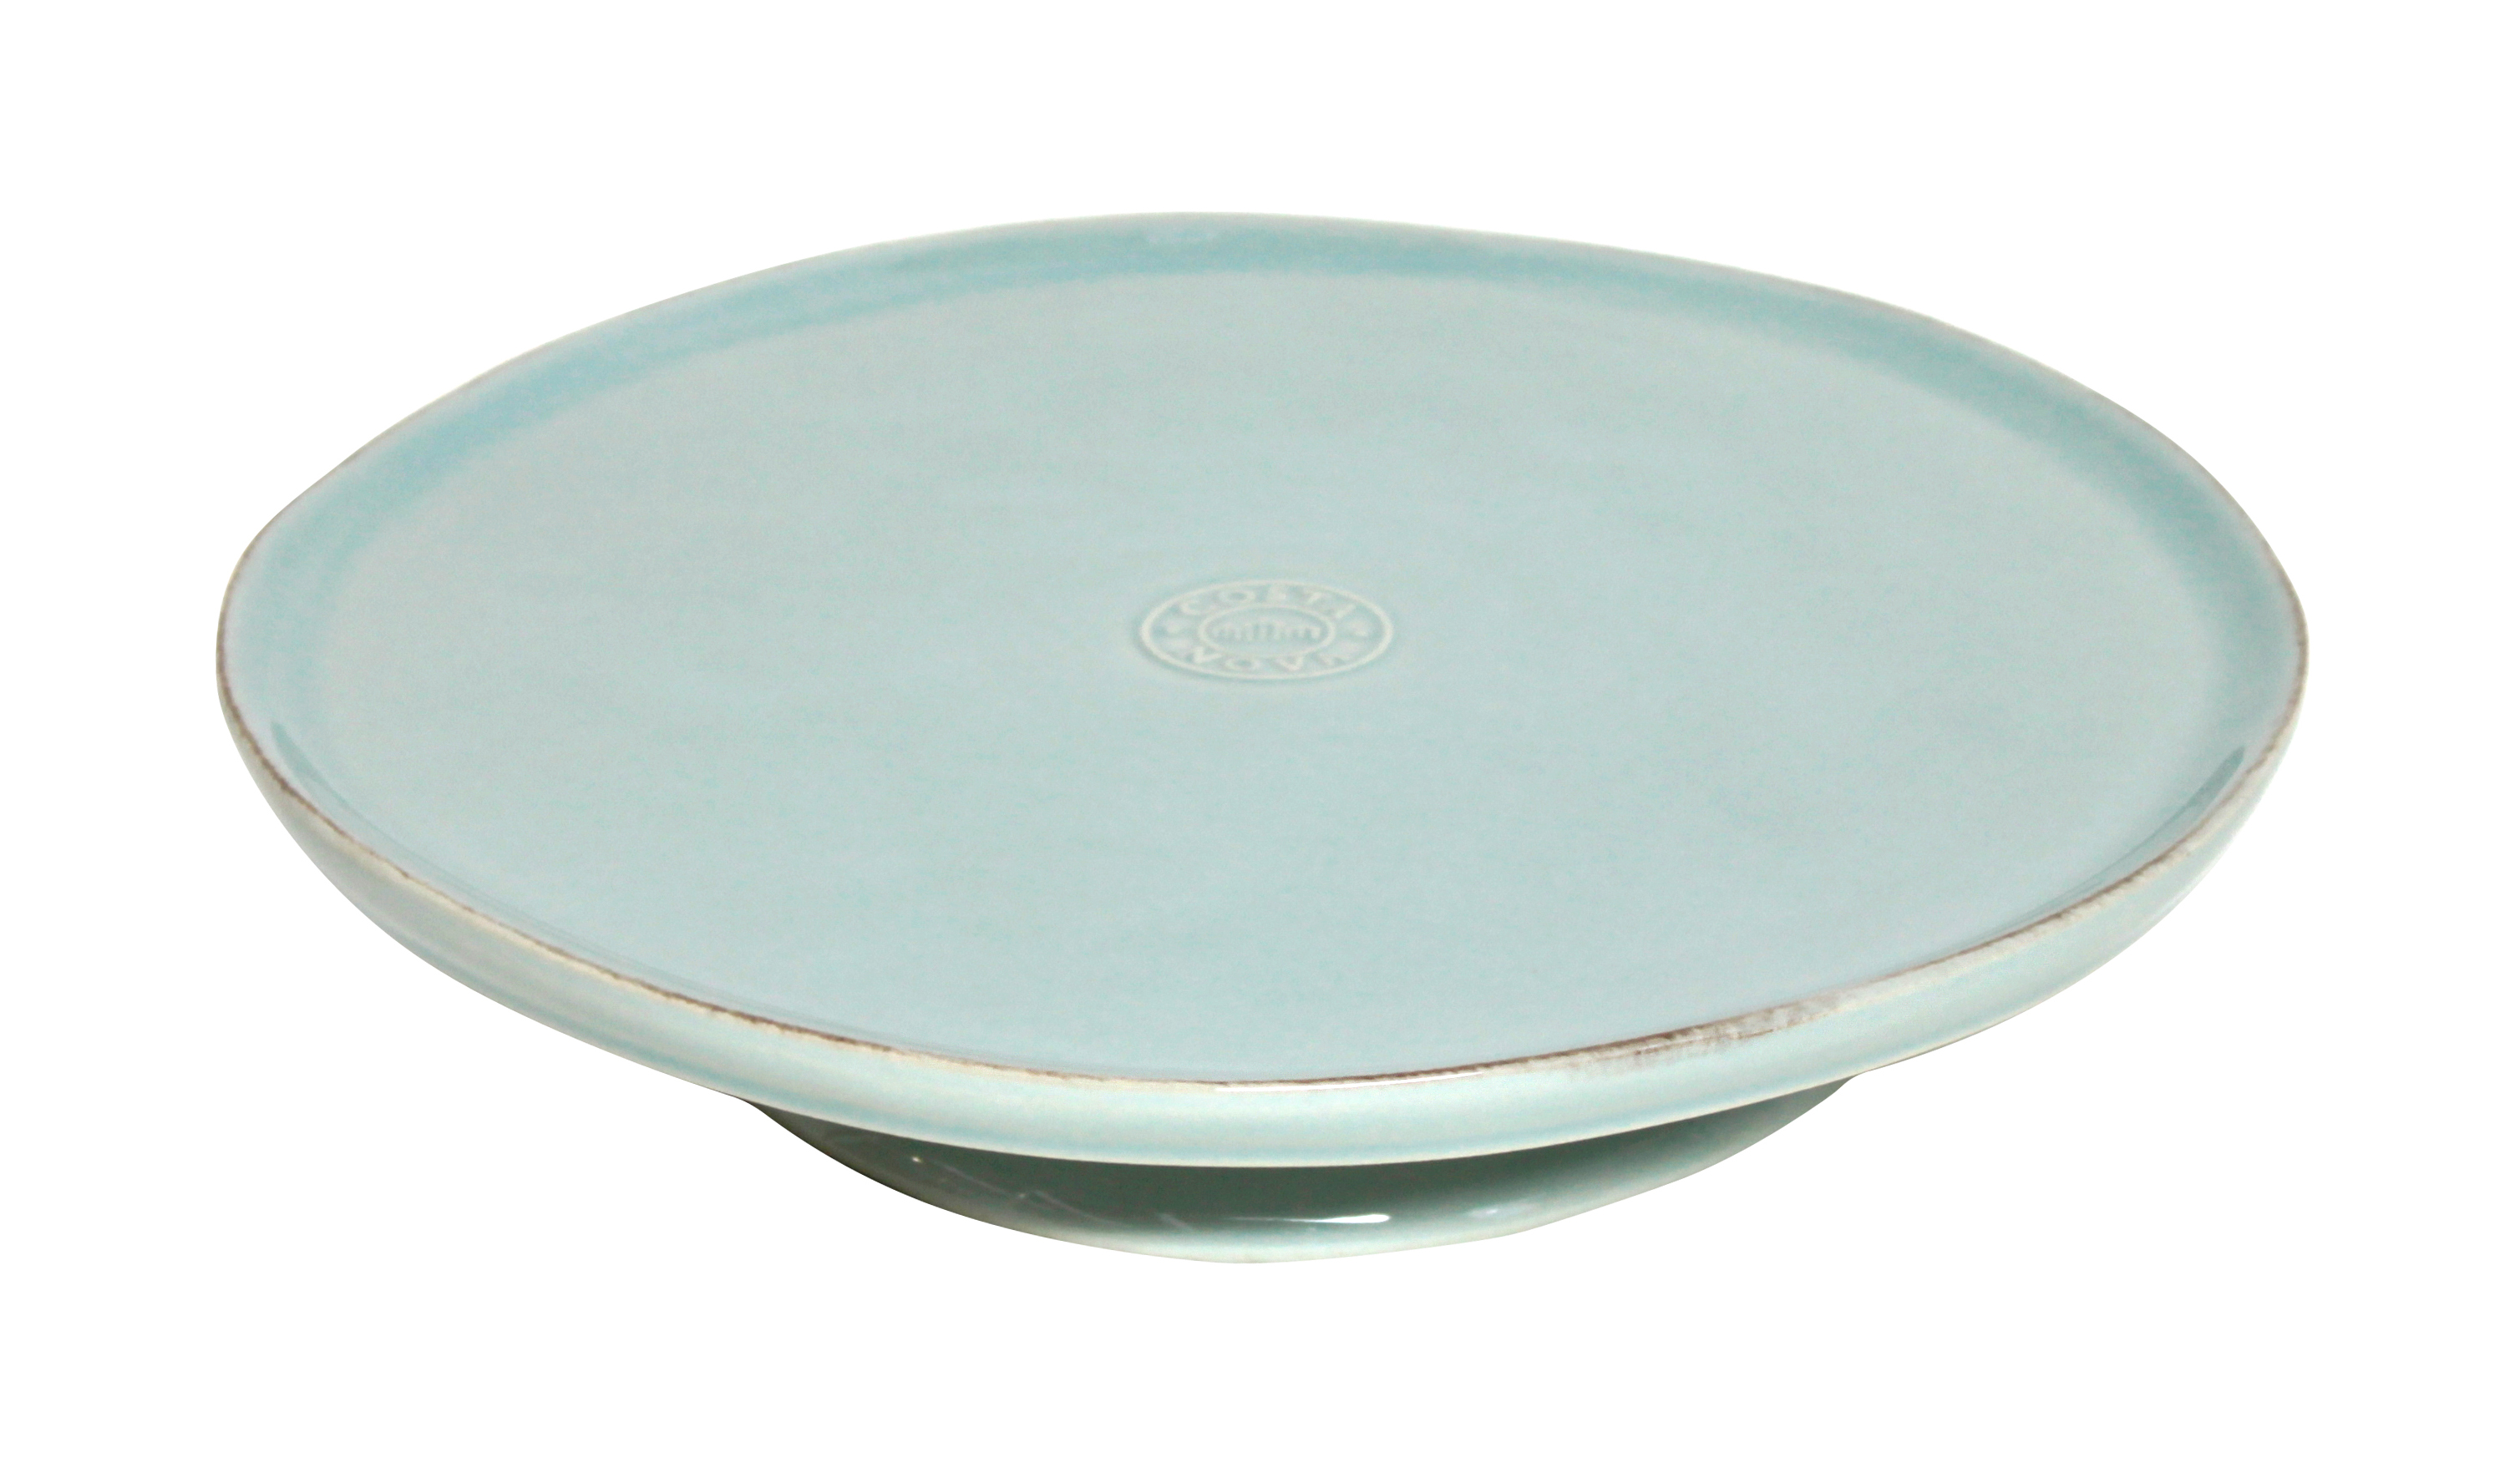 Nova Turquoise Footed Cake Plate 26cm Gift